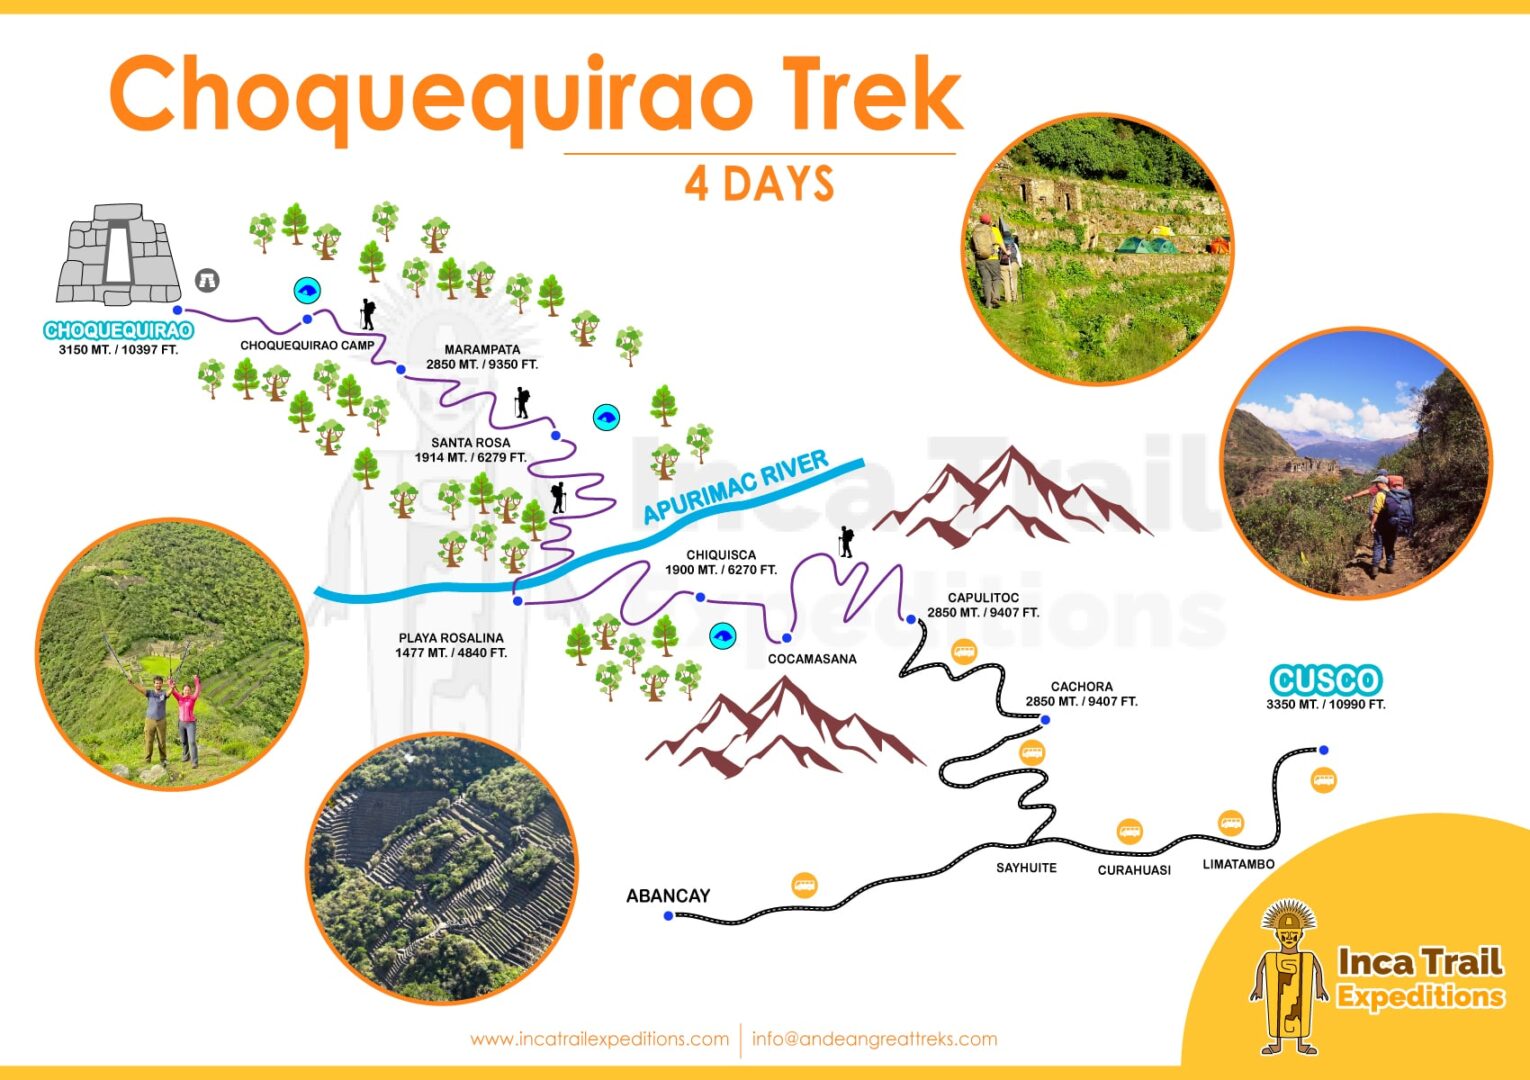 CHOQUEQUIRAO-TREK-4-DAYS-BY-INCA-TRAIL-EXPEDITIONS